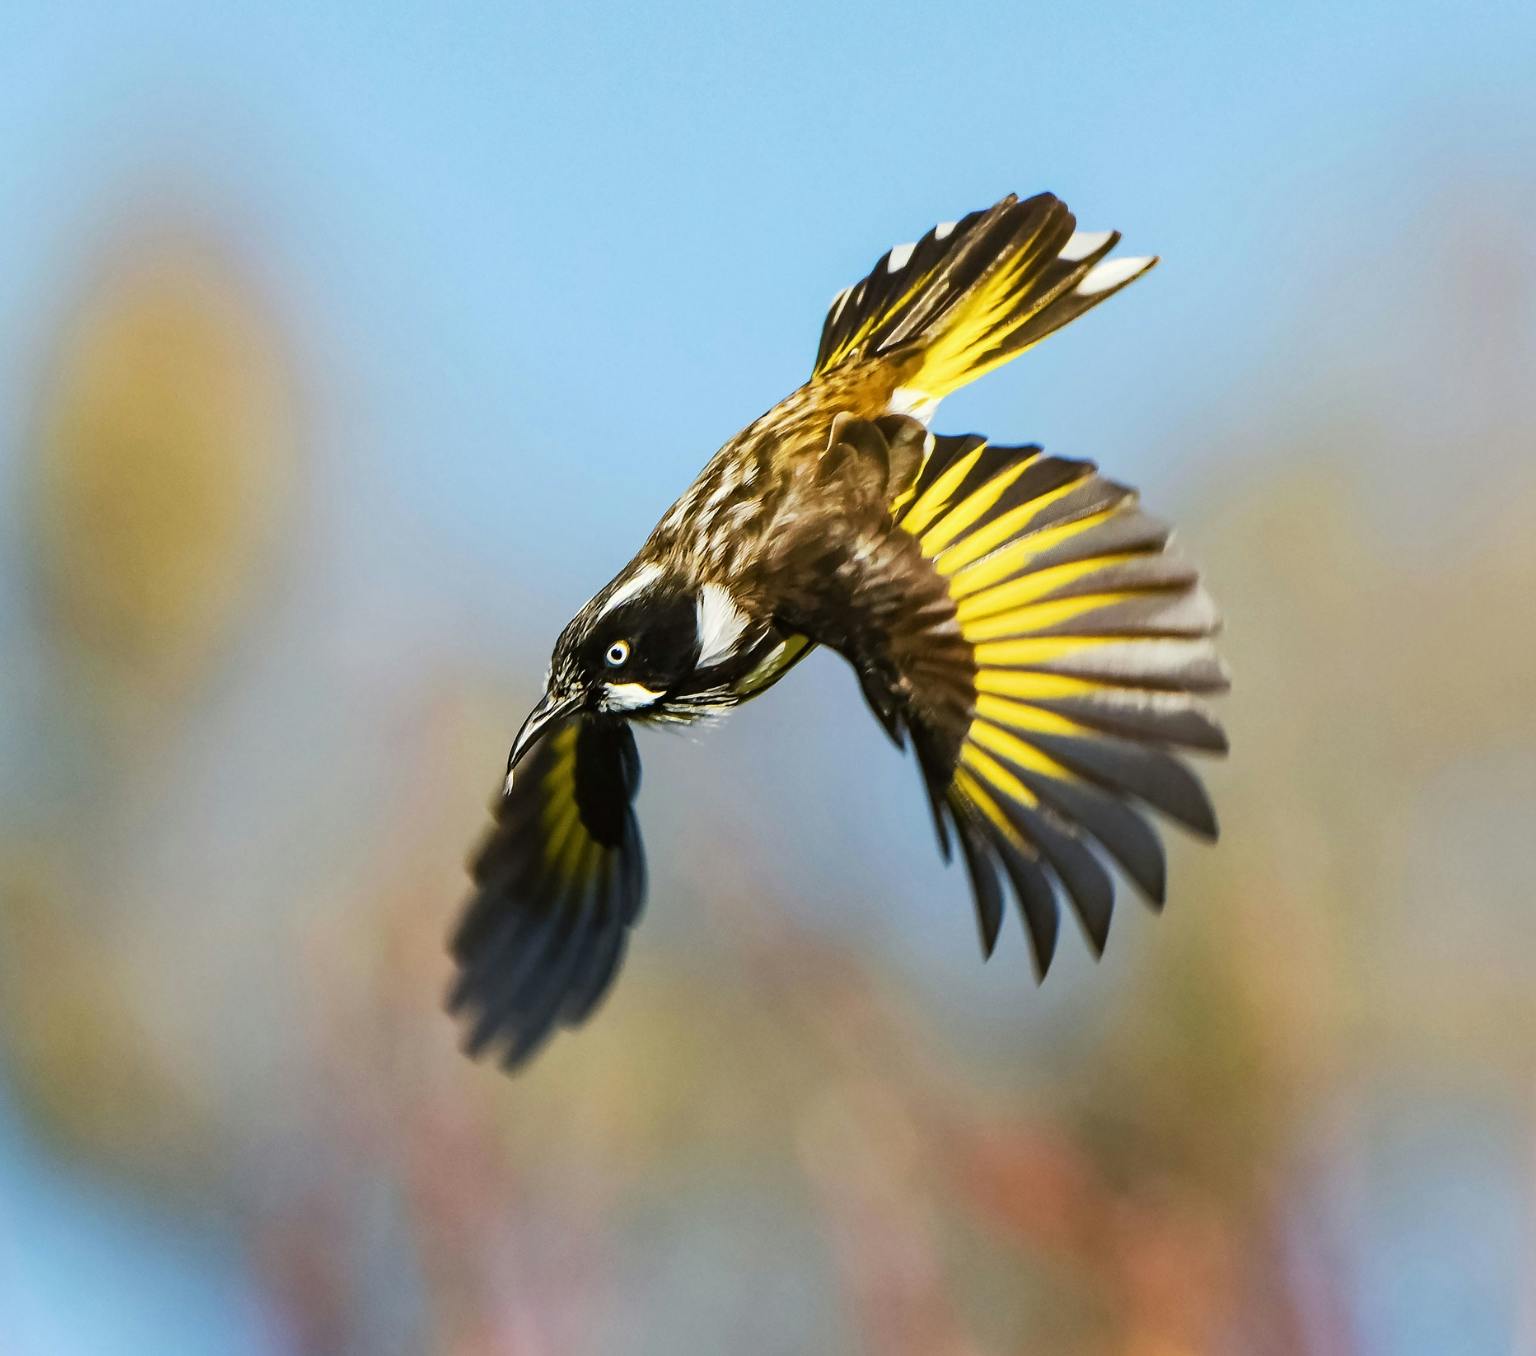 bird flying with its wings stretched. It has black and yellow feathers